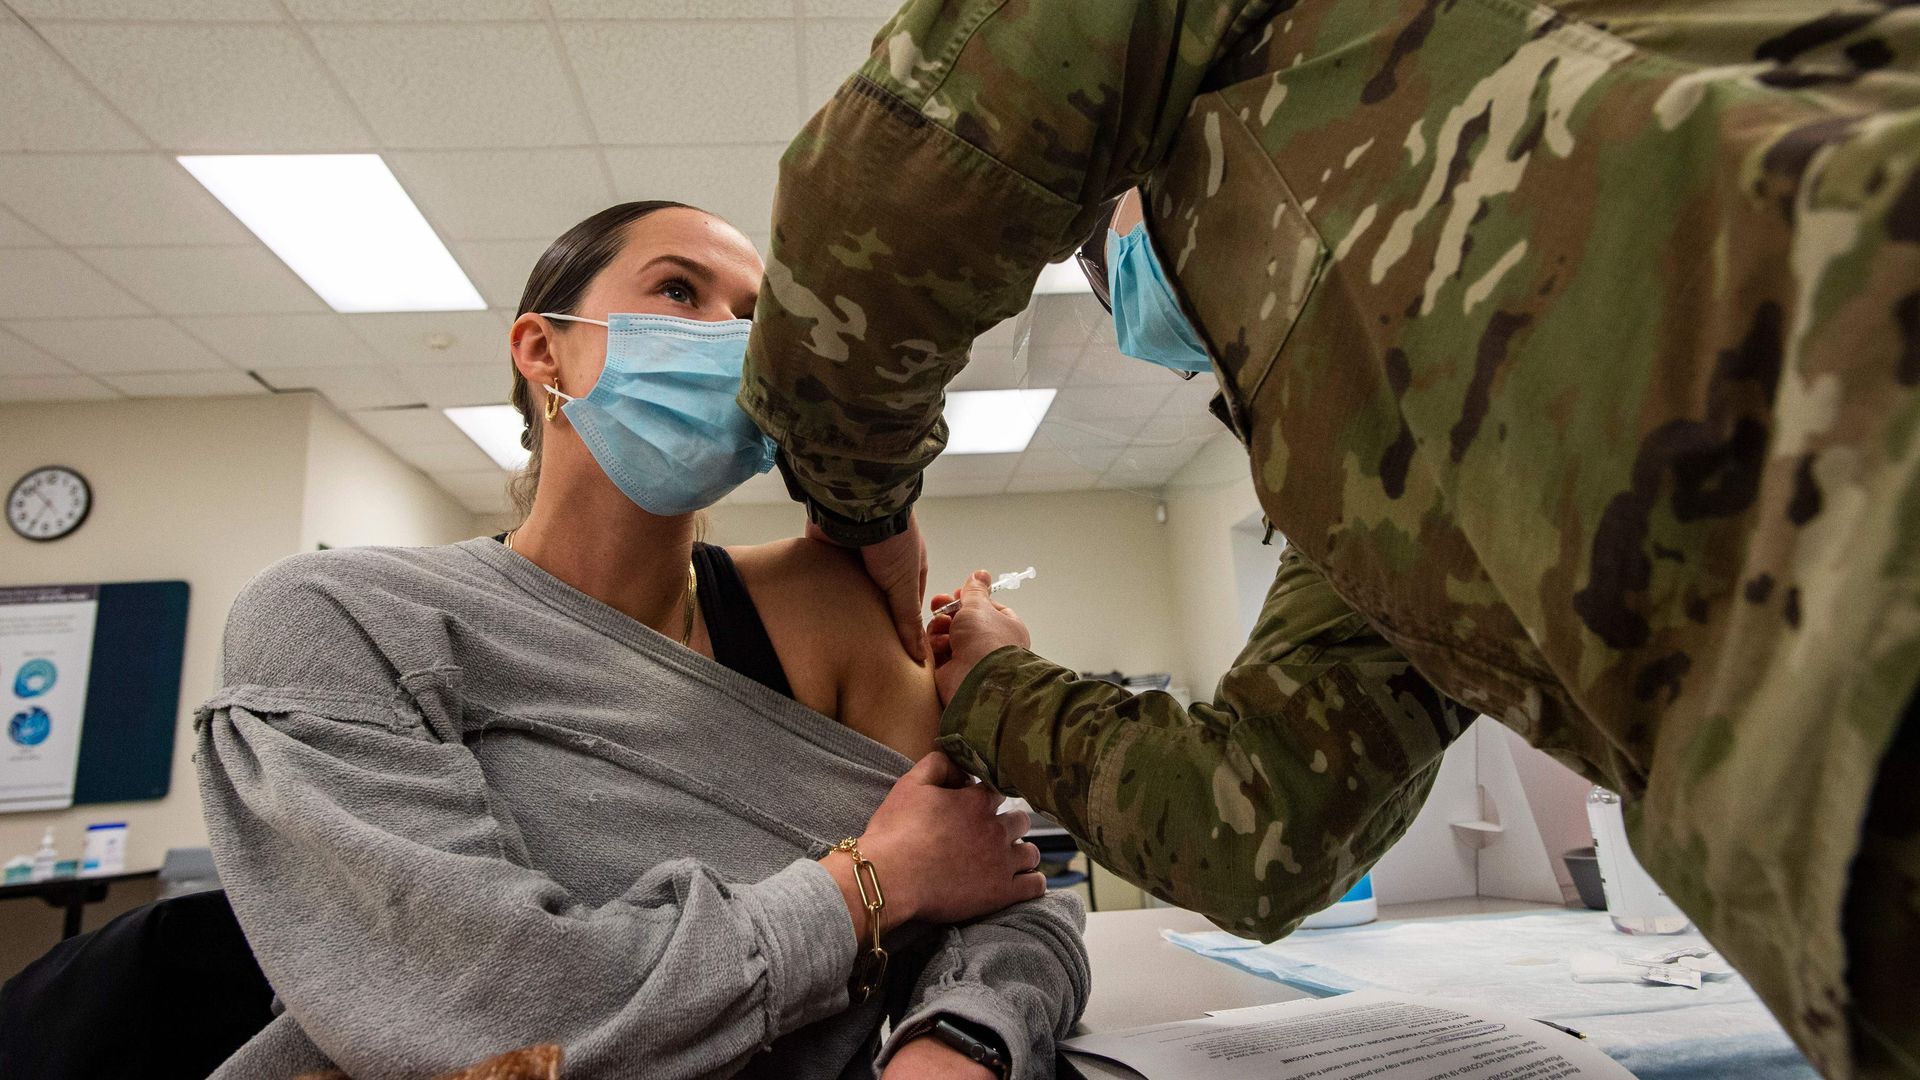 A woman receives a COVID-19 vaccine shot from a US servicemember